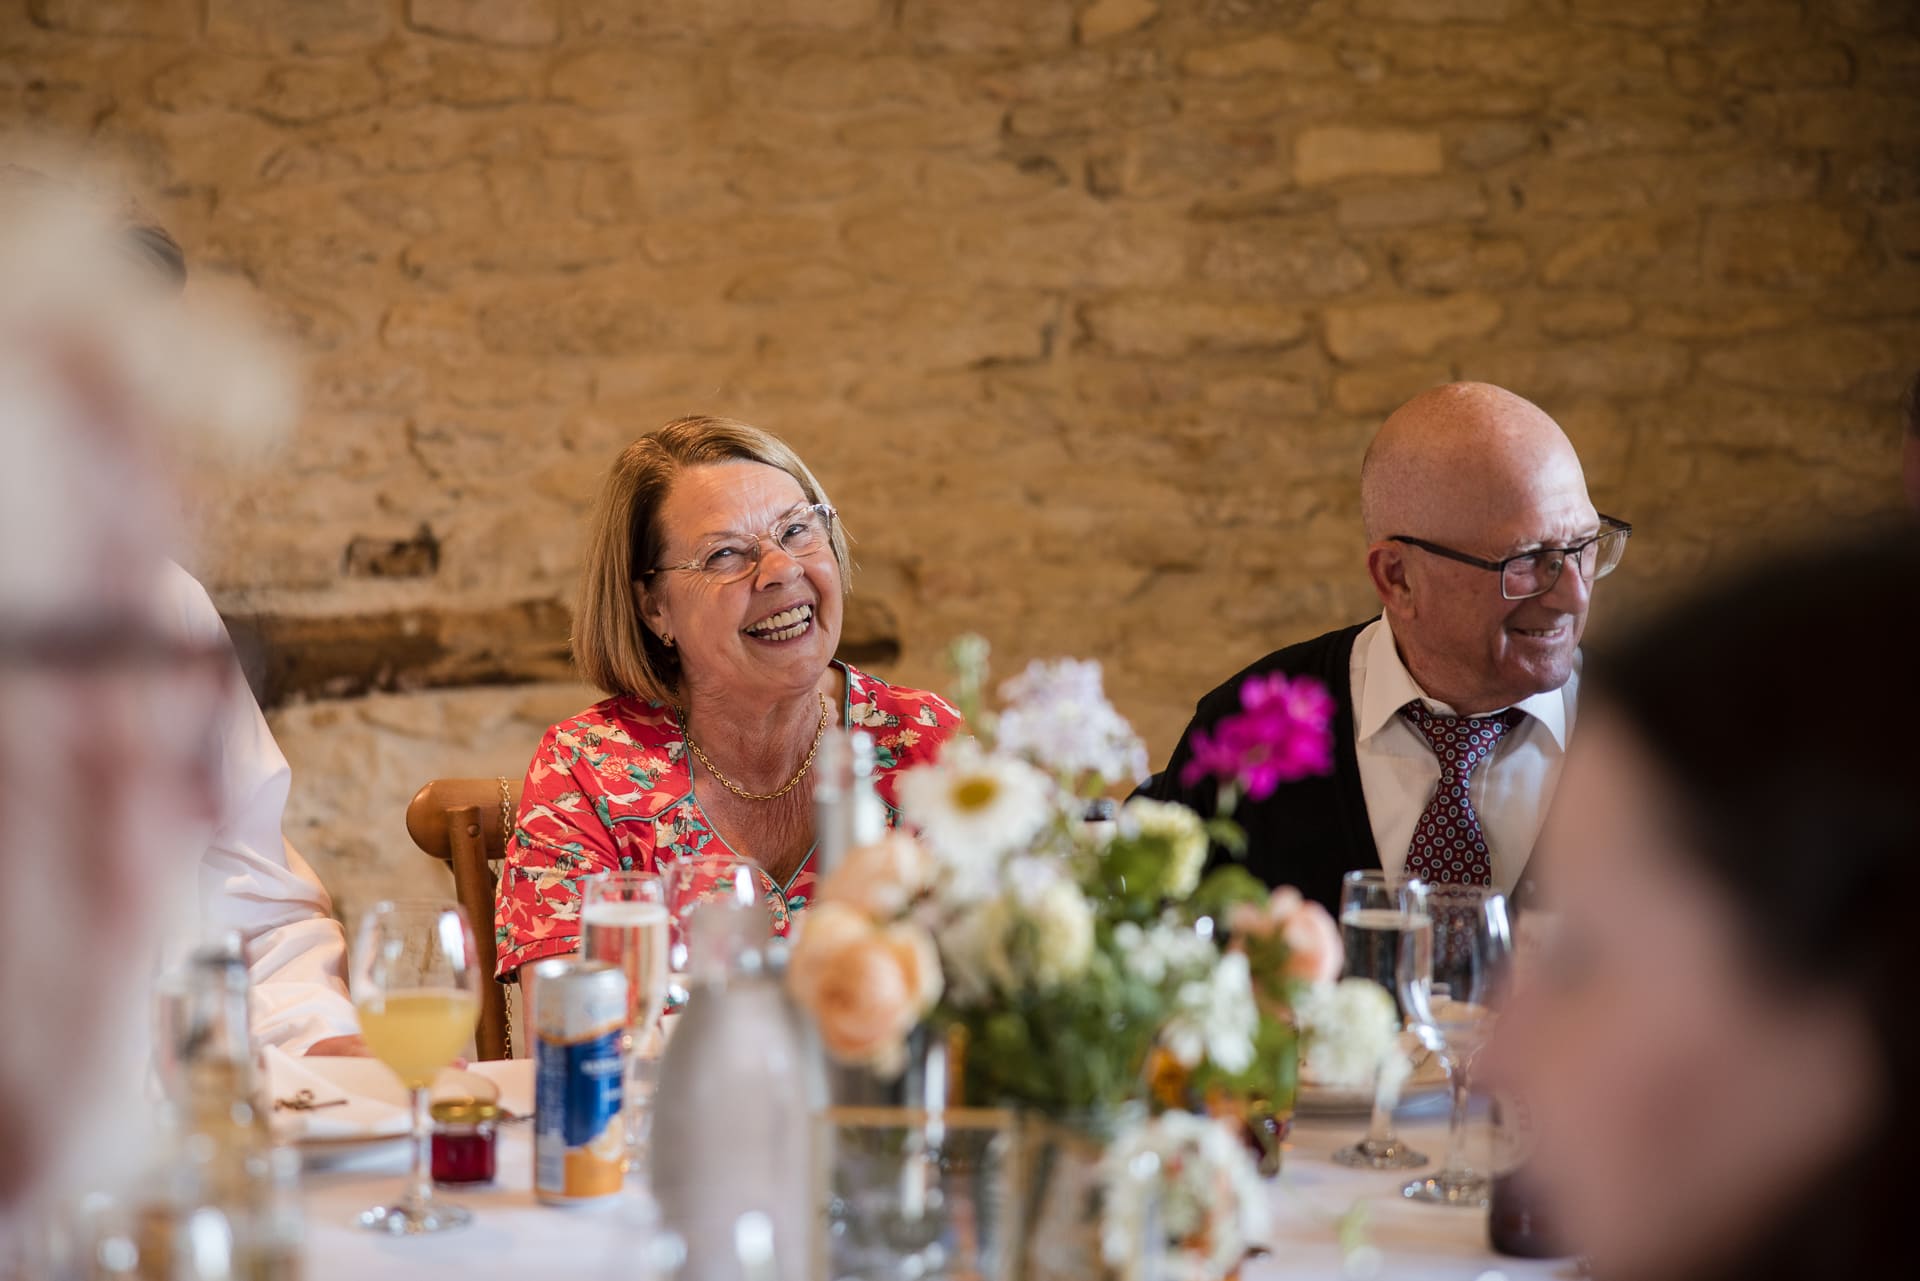 Laughing guest at the wedding breakfast